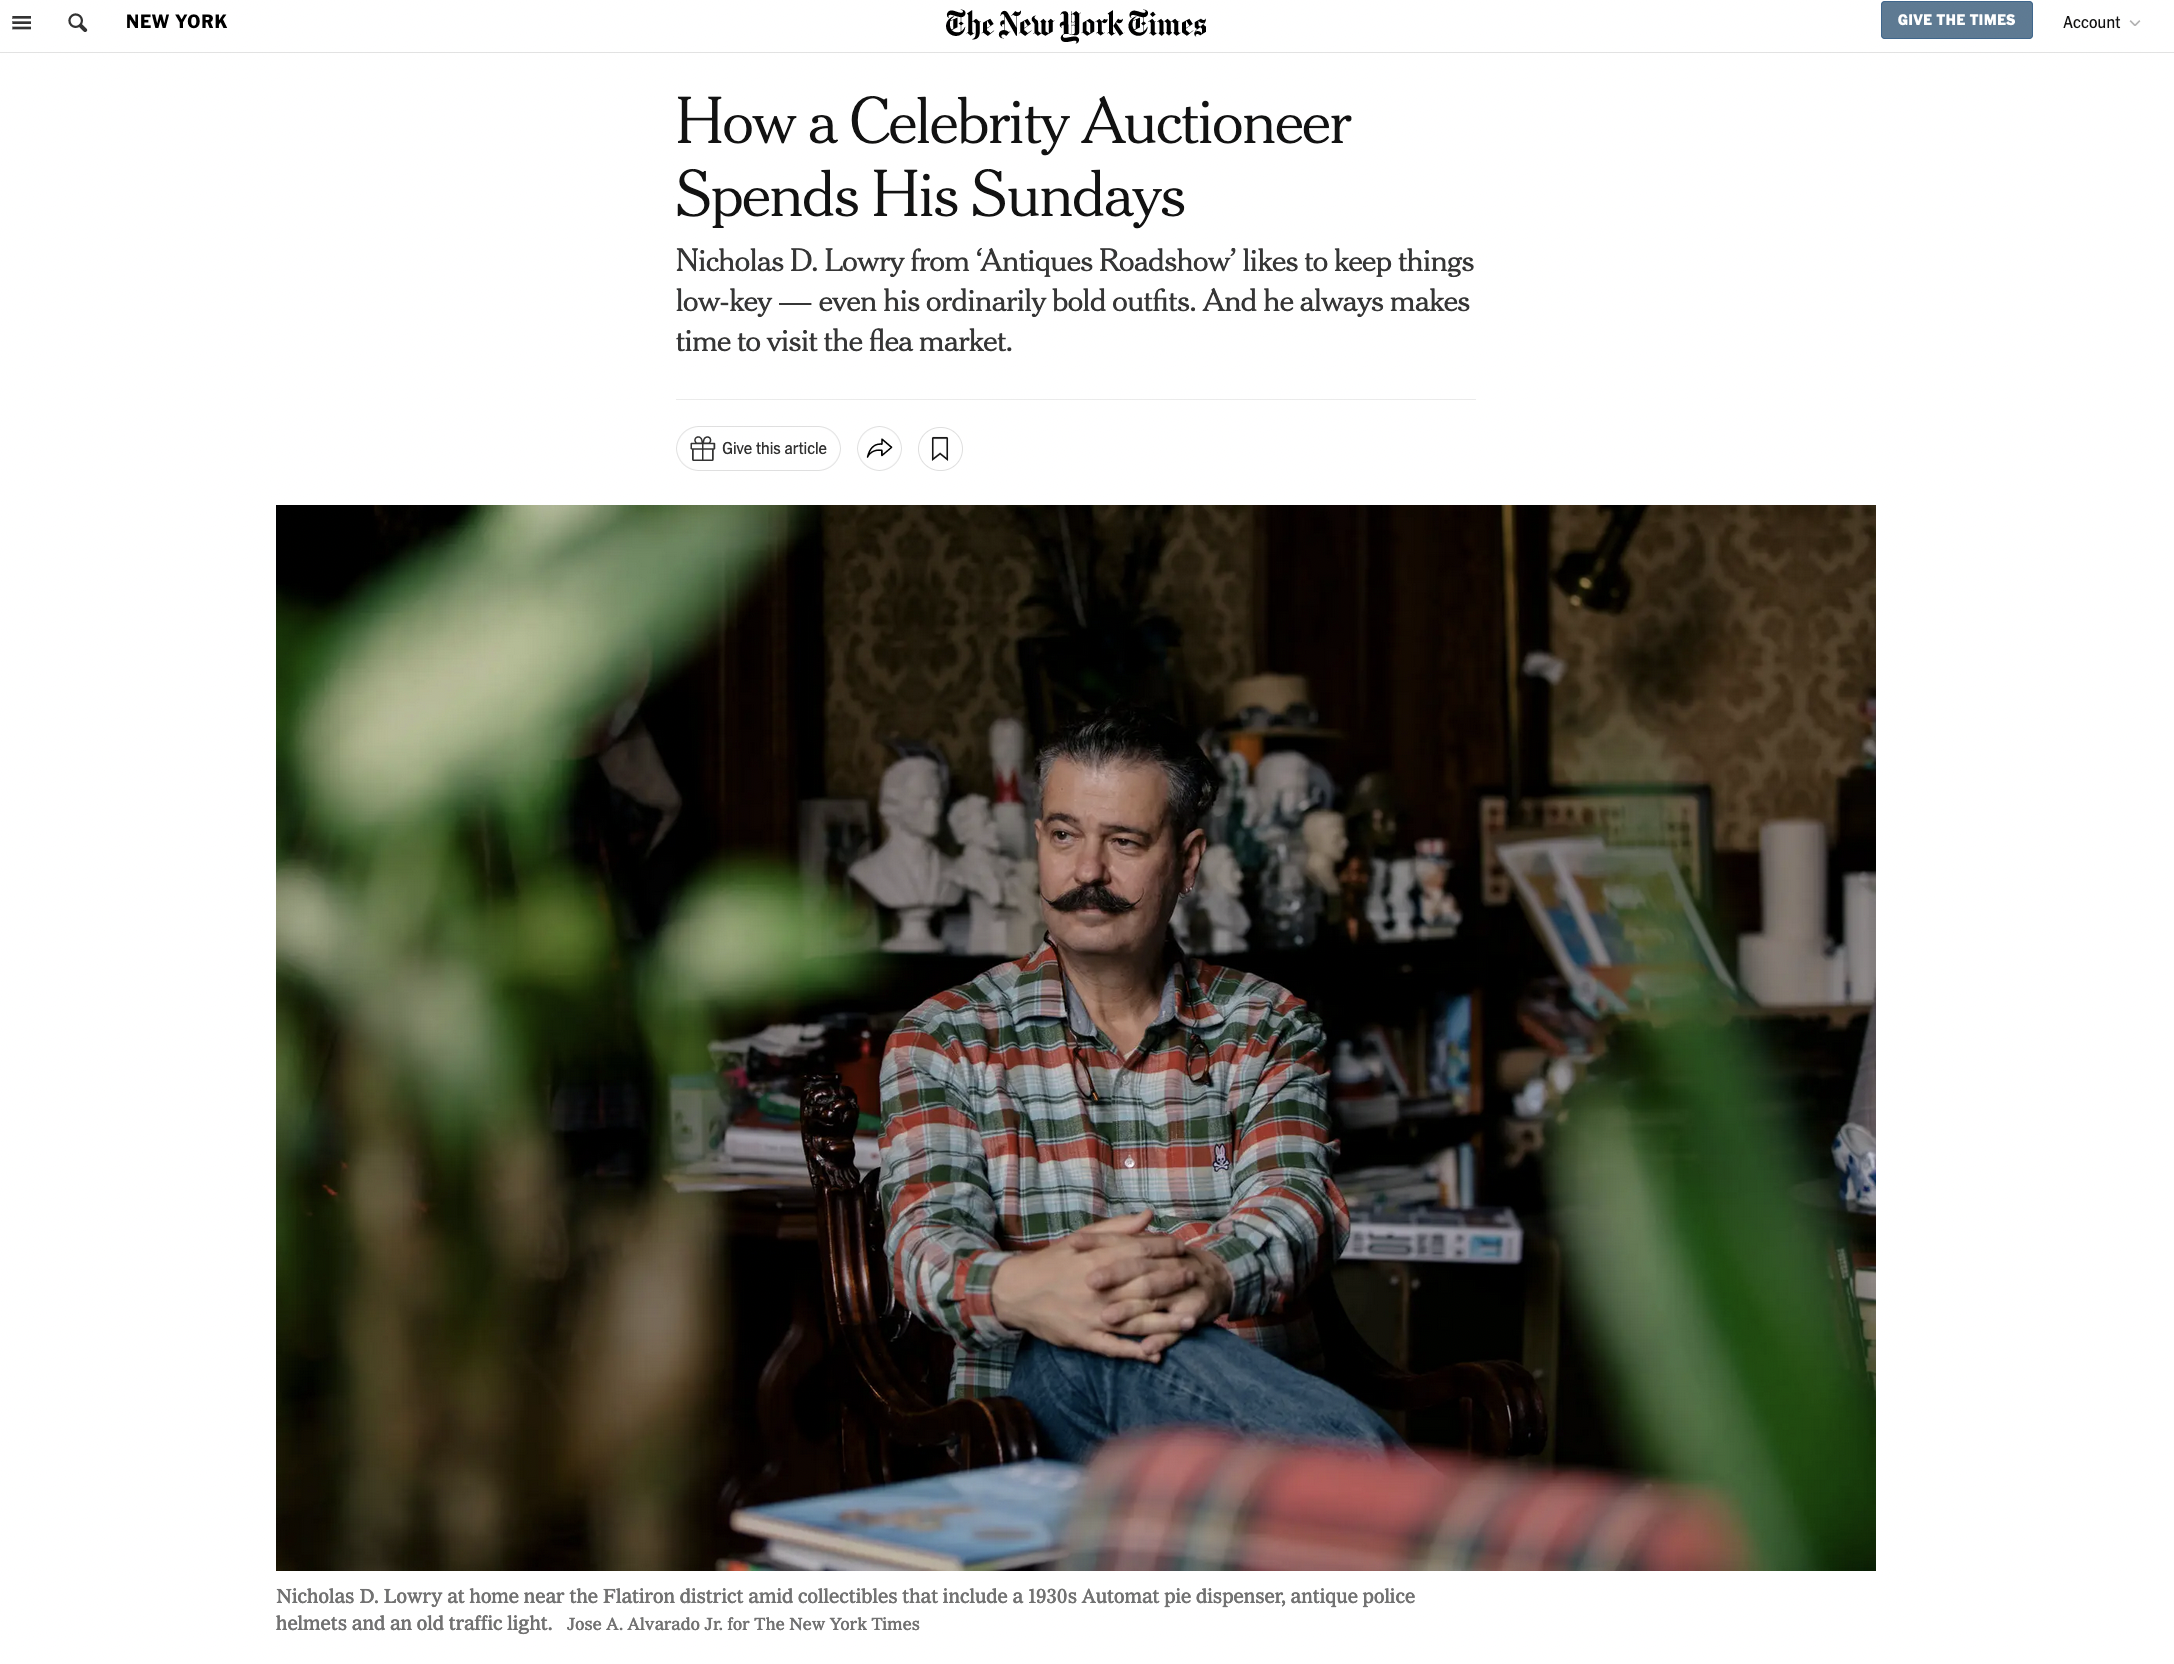 Thumbnail of for The New York Times: How a Celebrity Auctioneer Spends His Sundays